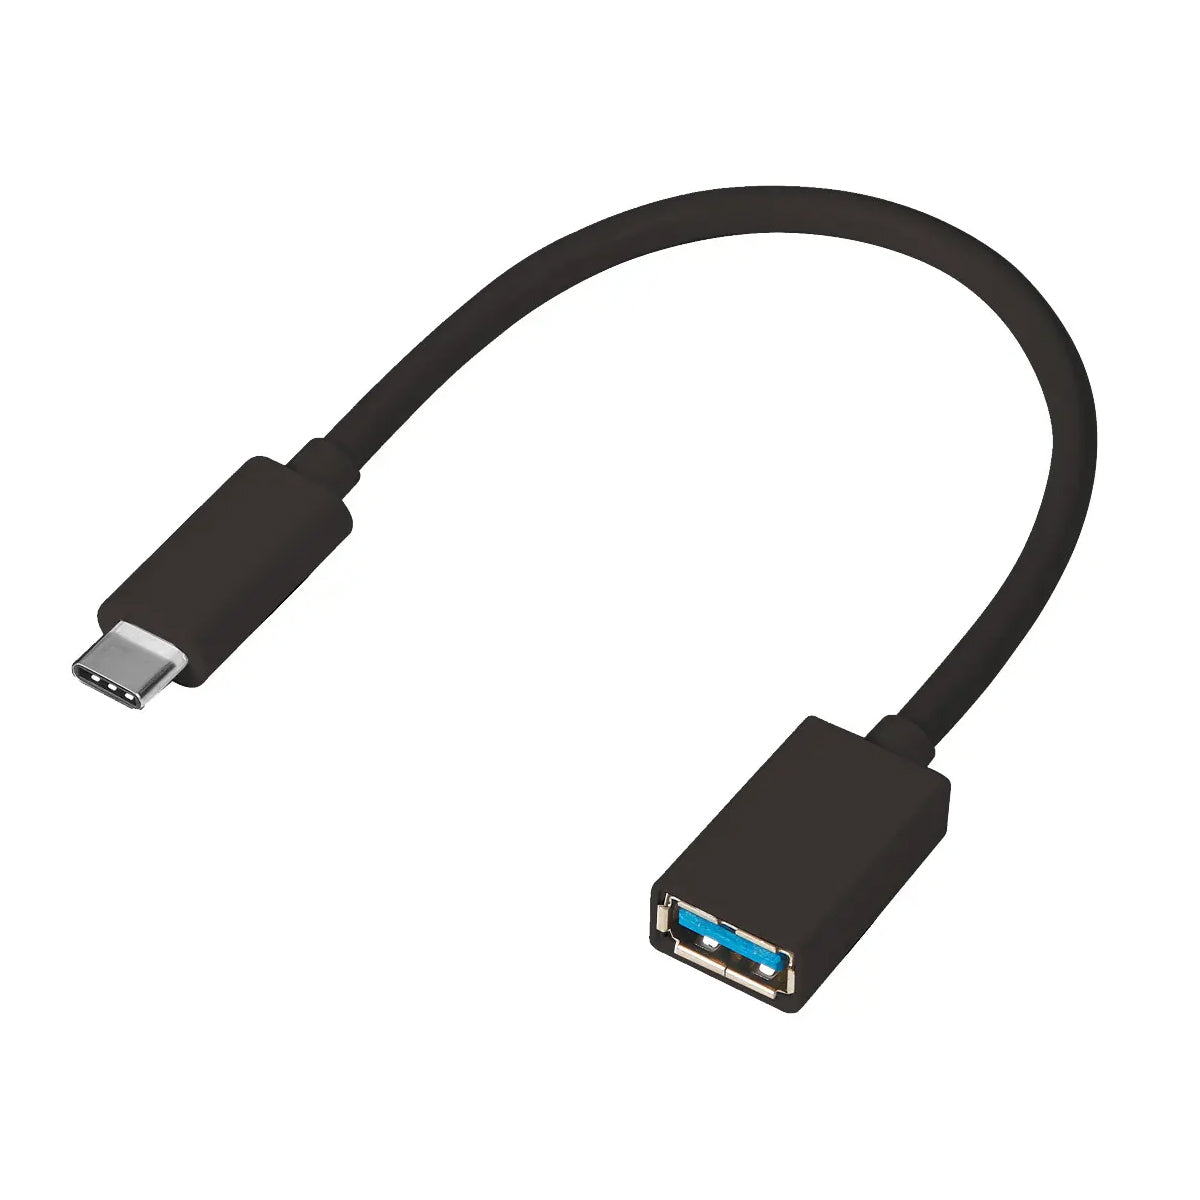 Q-Link 8" Flexible USB-C to USB-A Adapter + Extension